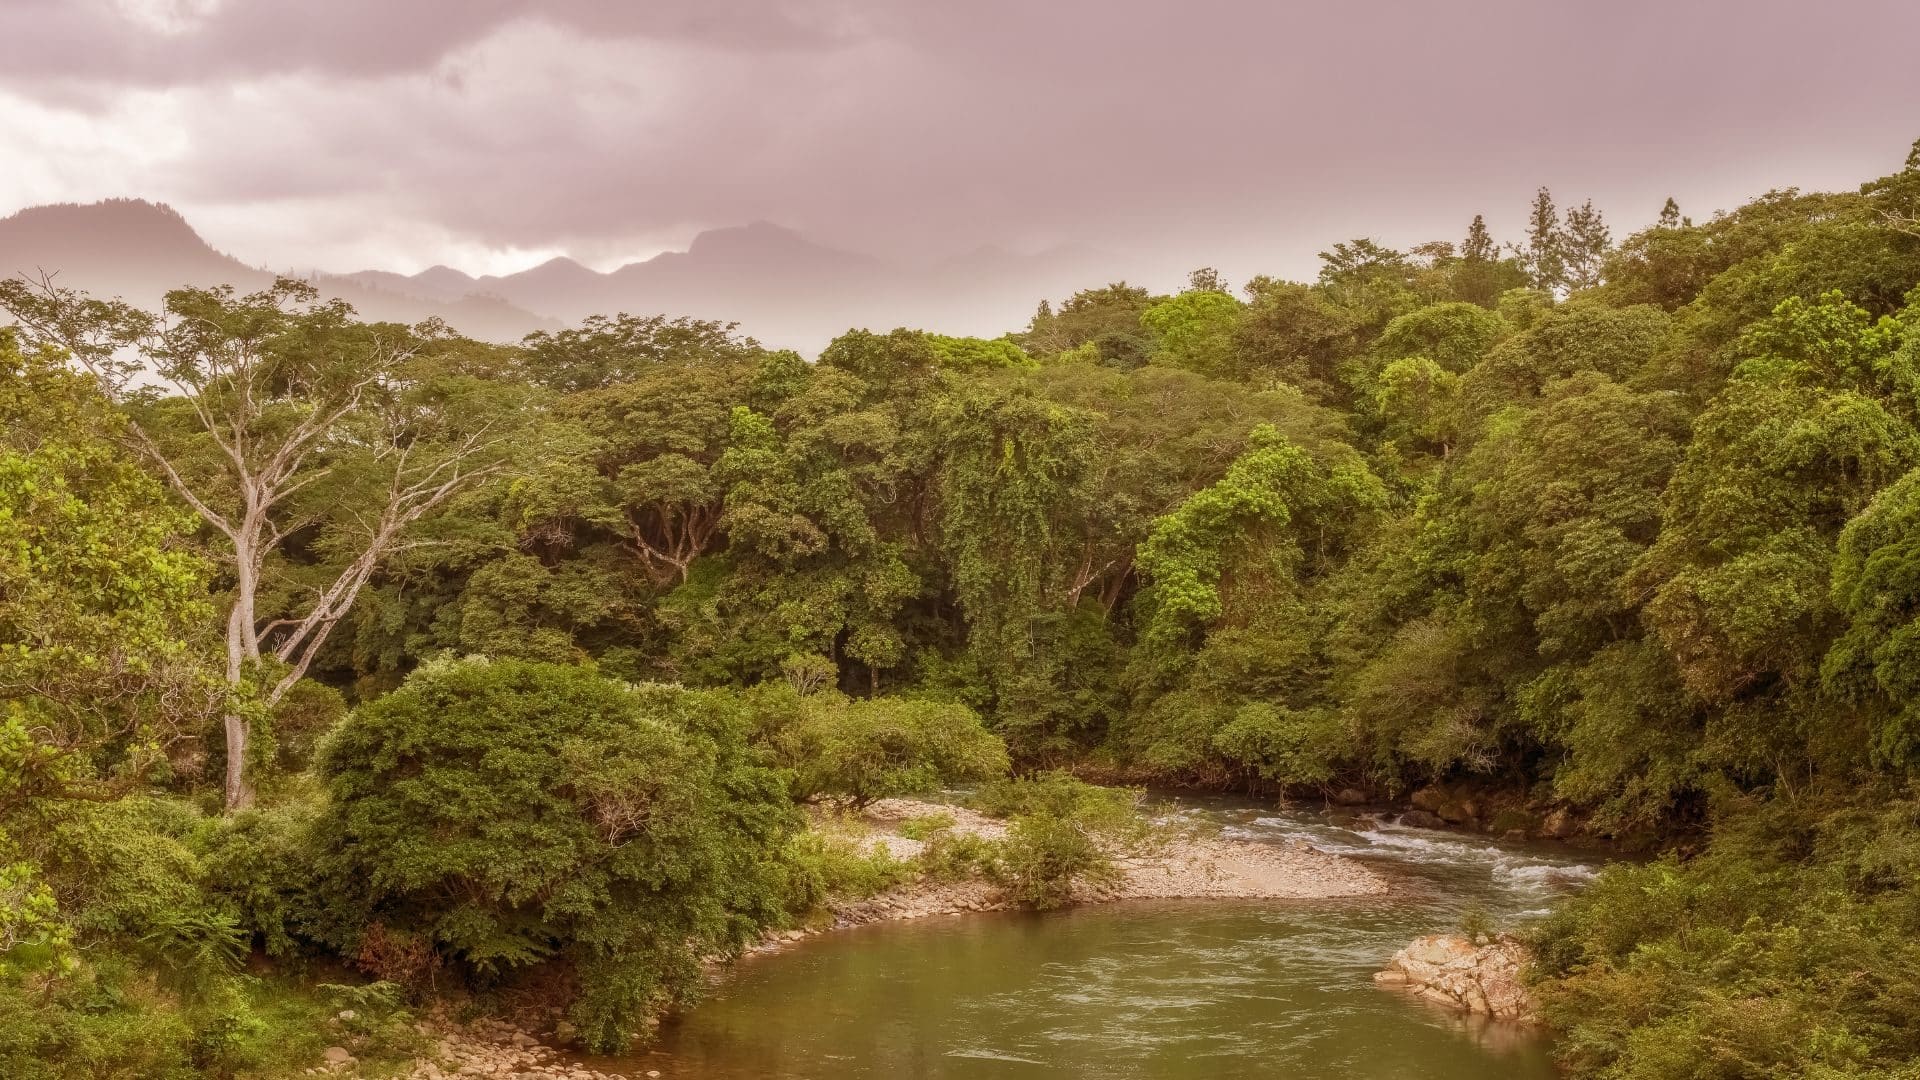 River winding through lush vegetation amidst pink and gray cloudy skies.